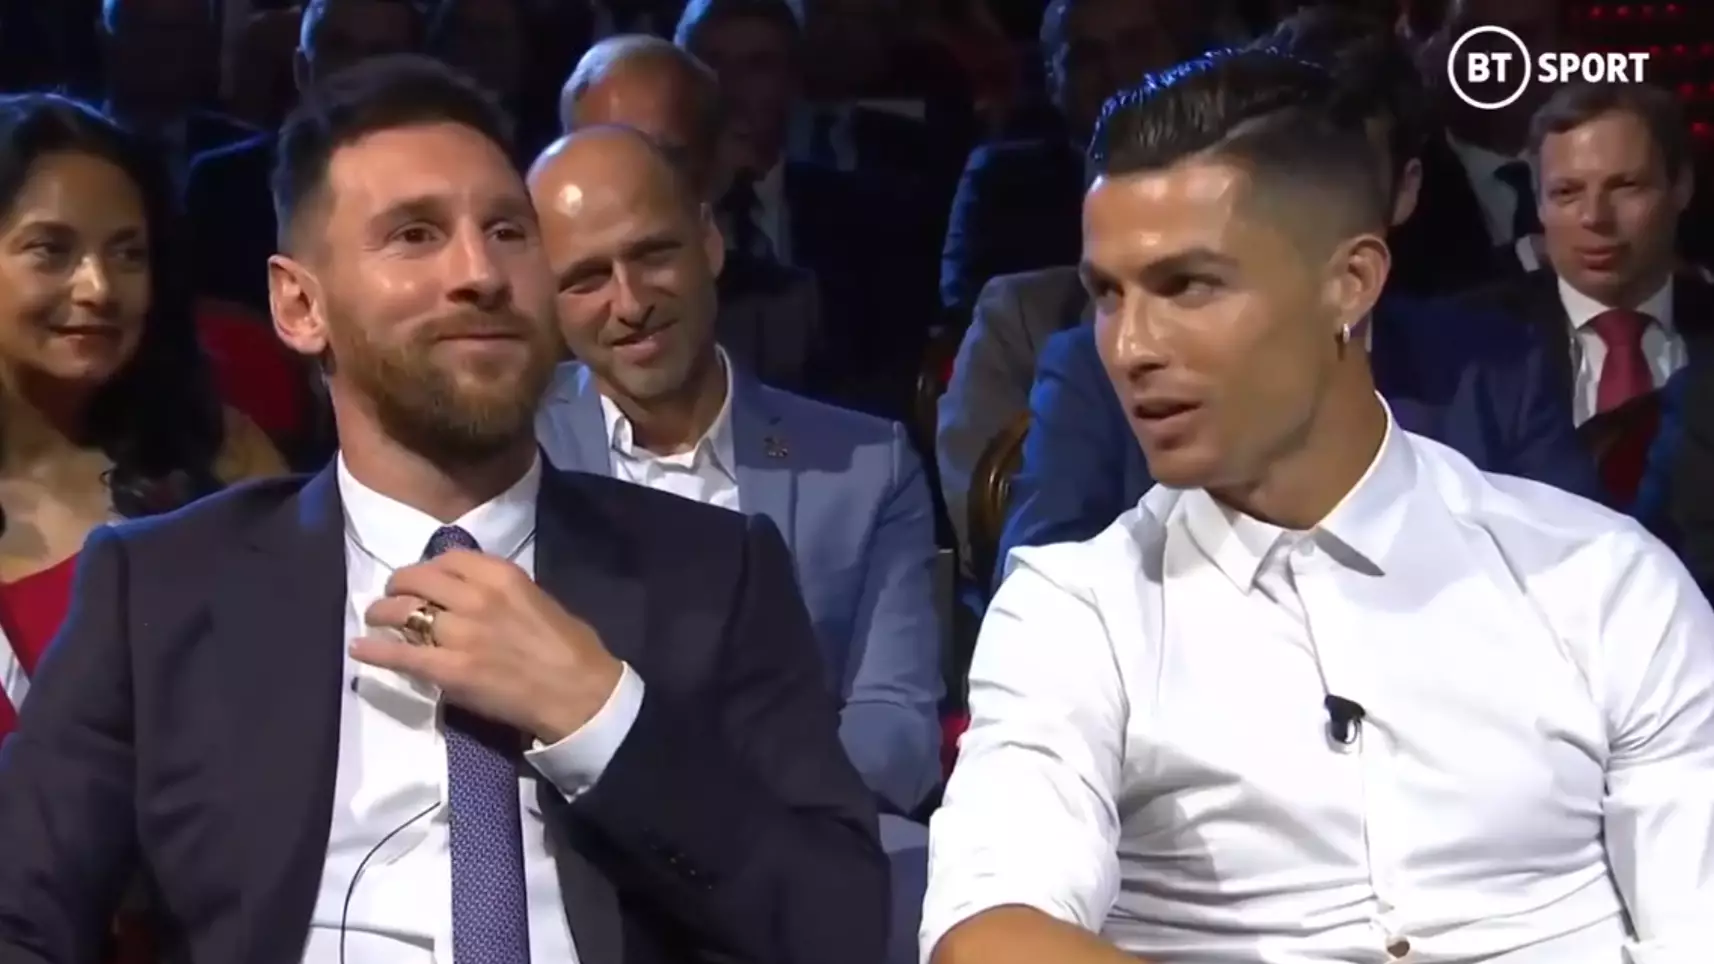 Cristiano Ronaldo And Lionel Messi's Friendly Rivalry Was Summed Up At Champions League Draw